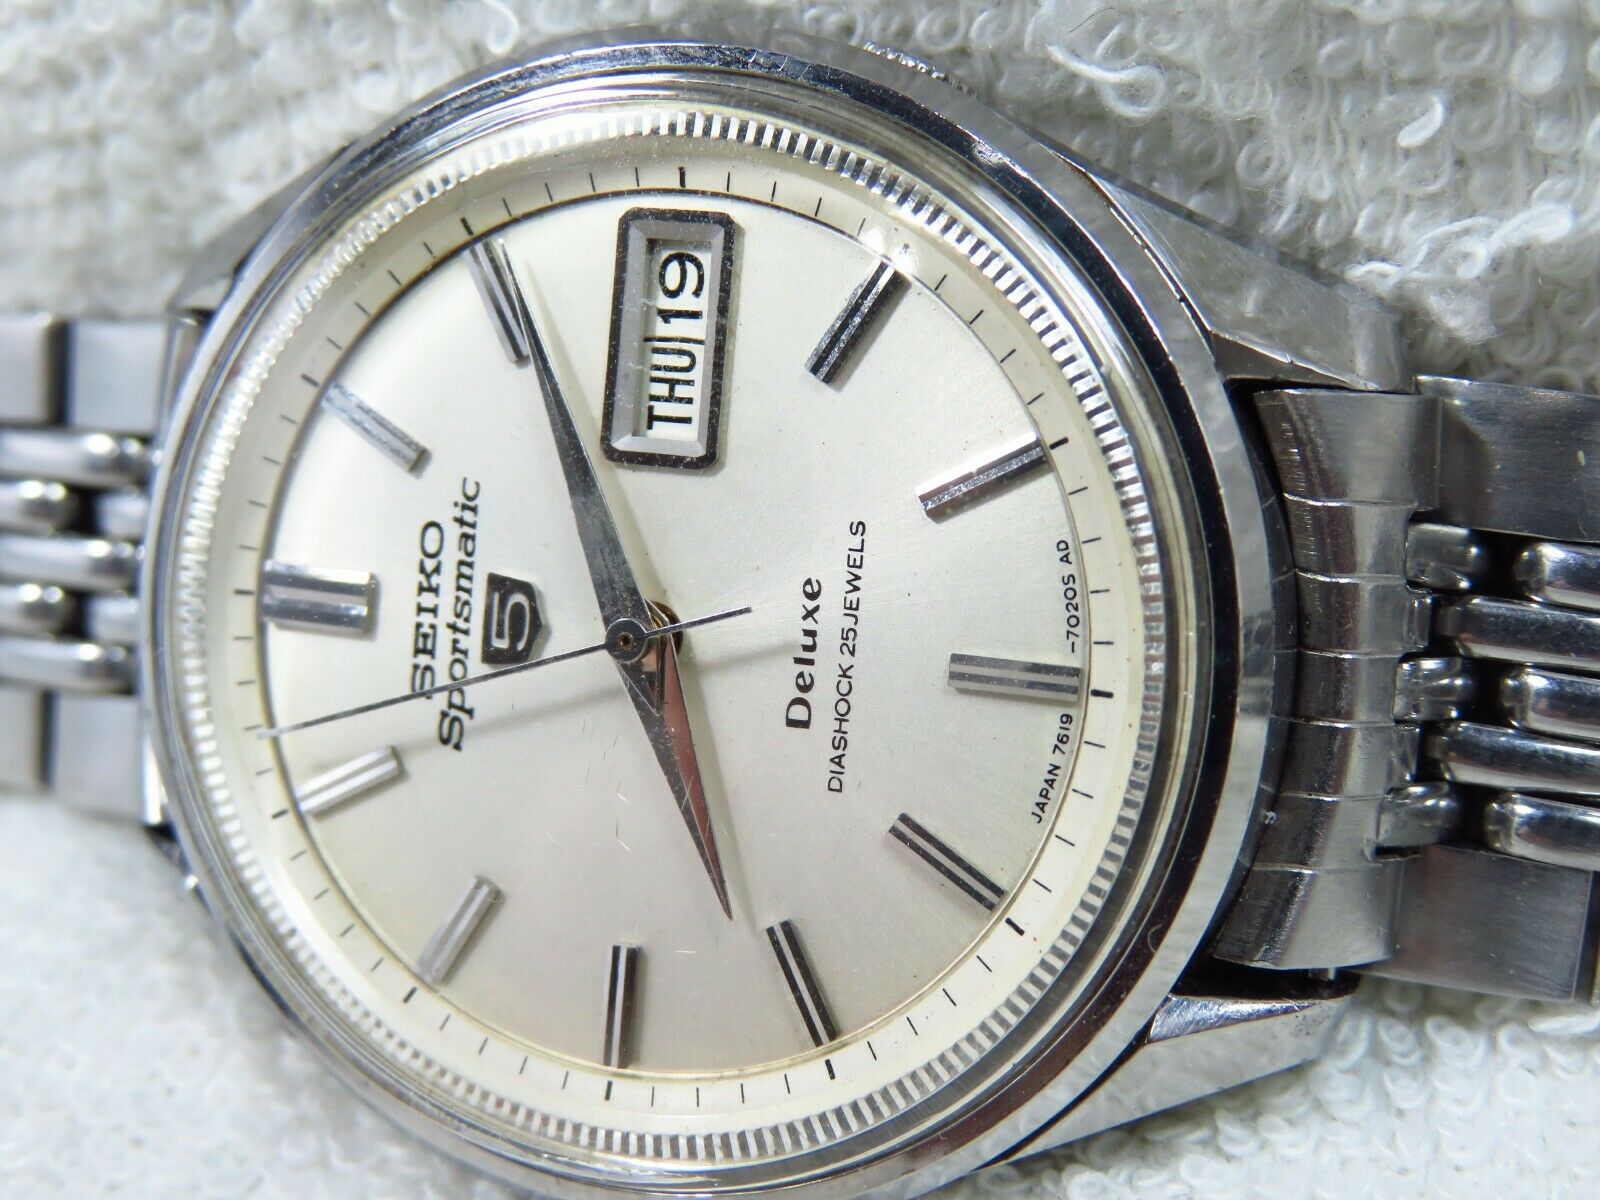 Vintage 1966 Seiko Sportsmatic 5 Deluxe watch [ 7619 - 7010 